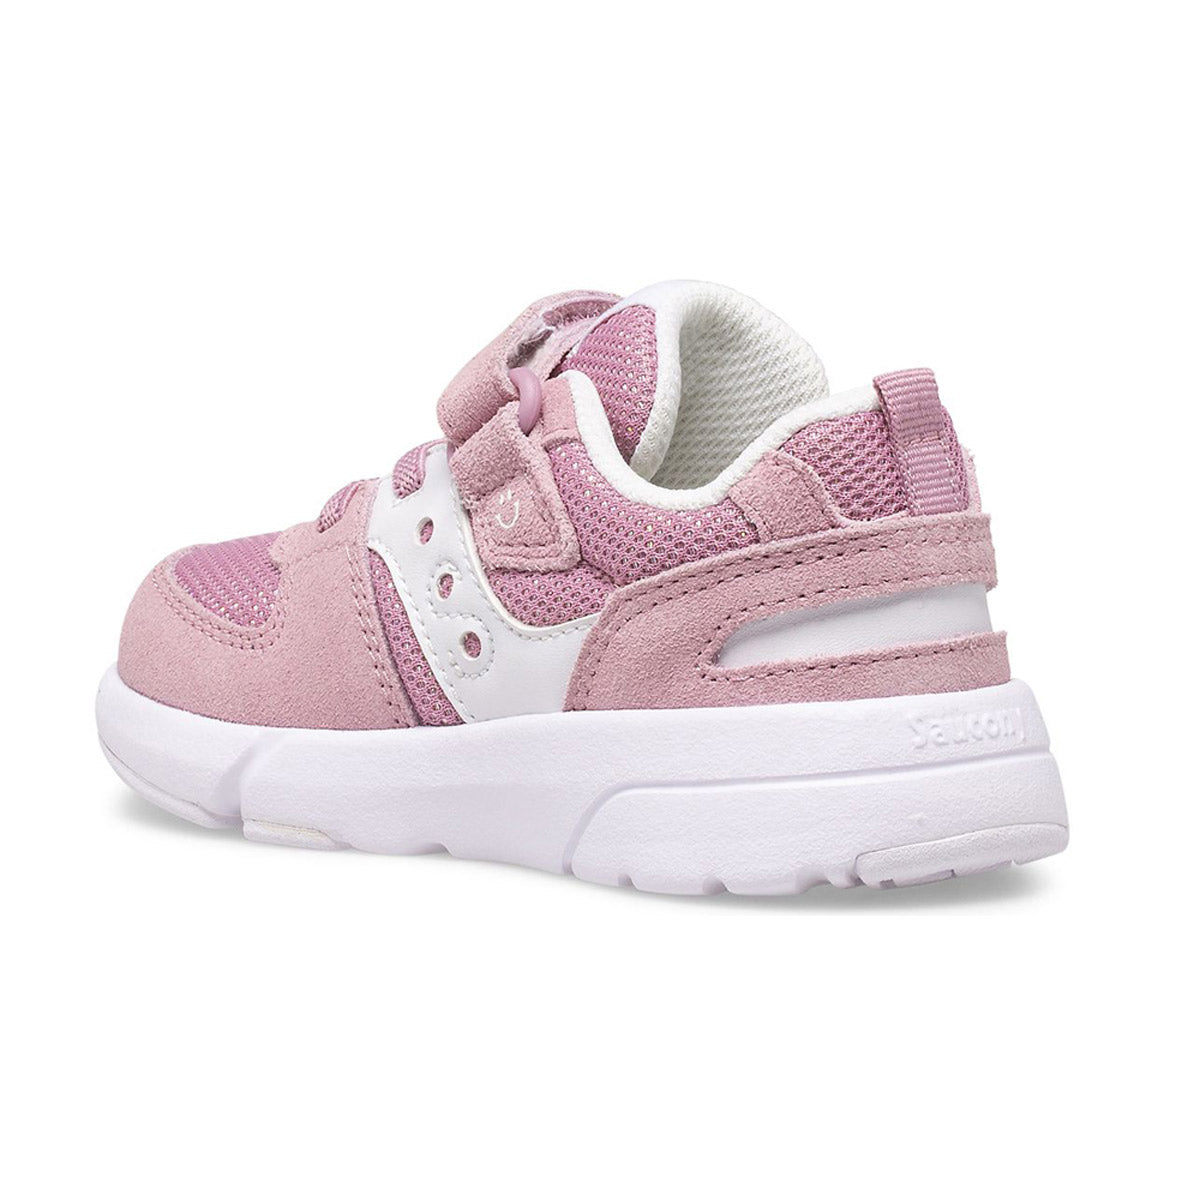 A single Saucony Jazz Lite 2.0 Blush toddler sneaker with a retro design isolated on a white background.